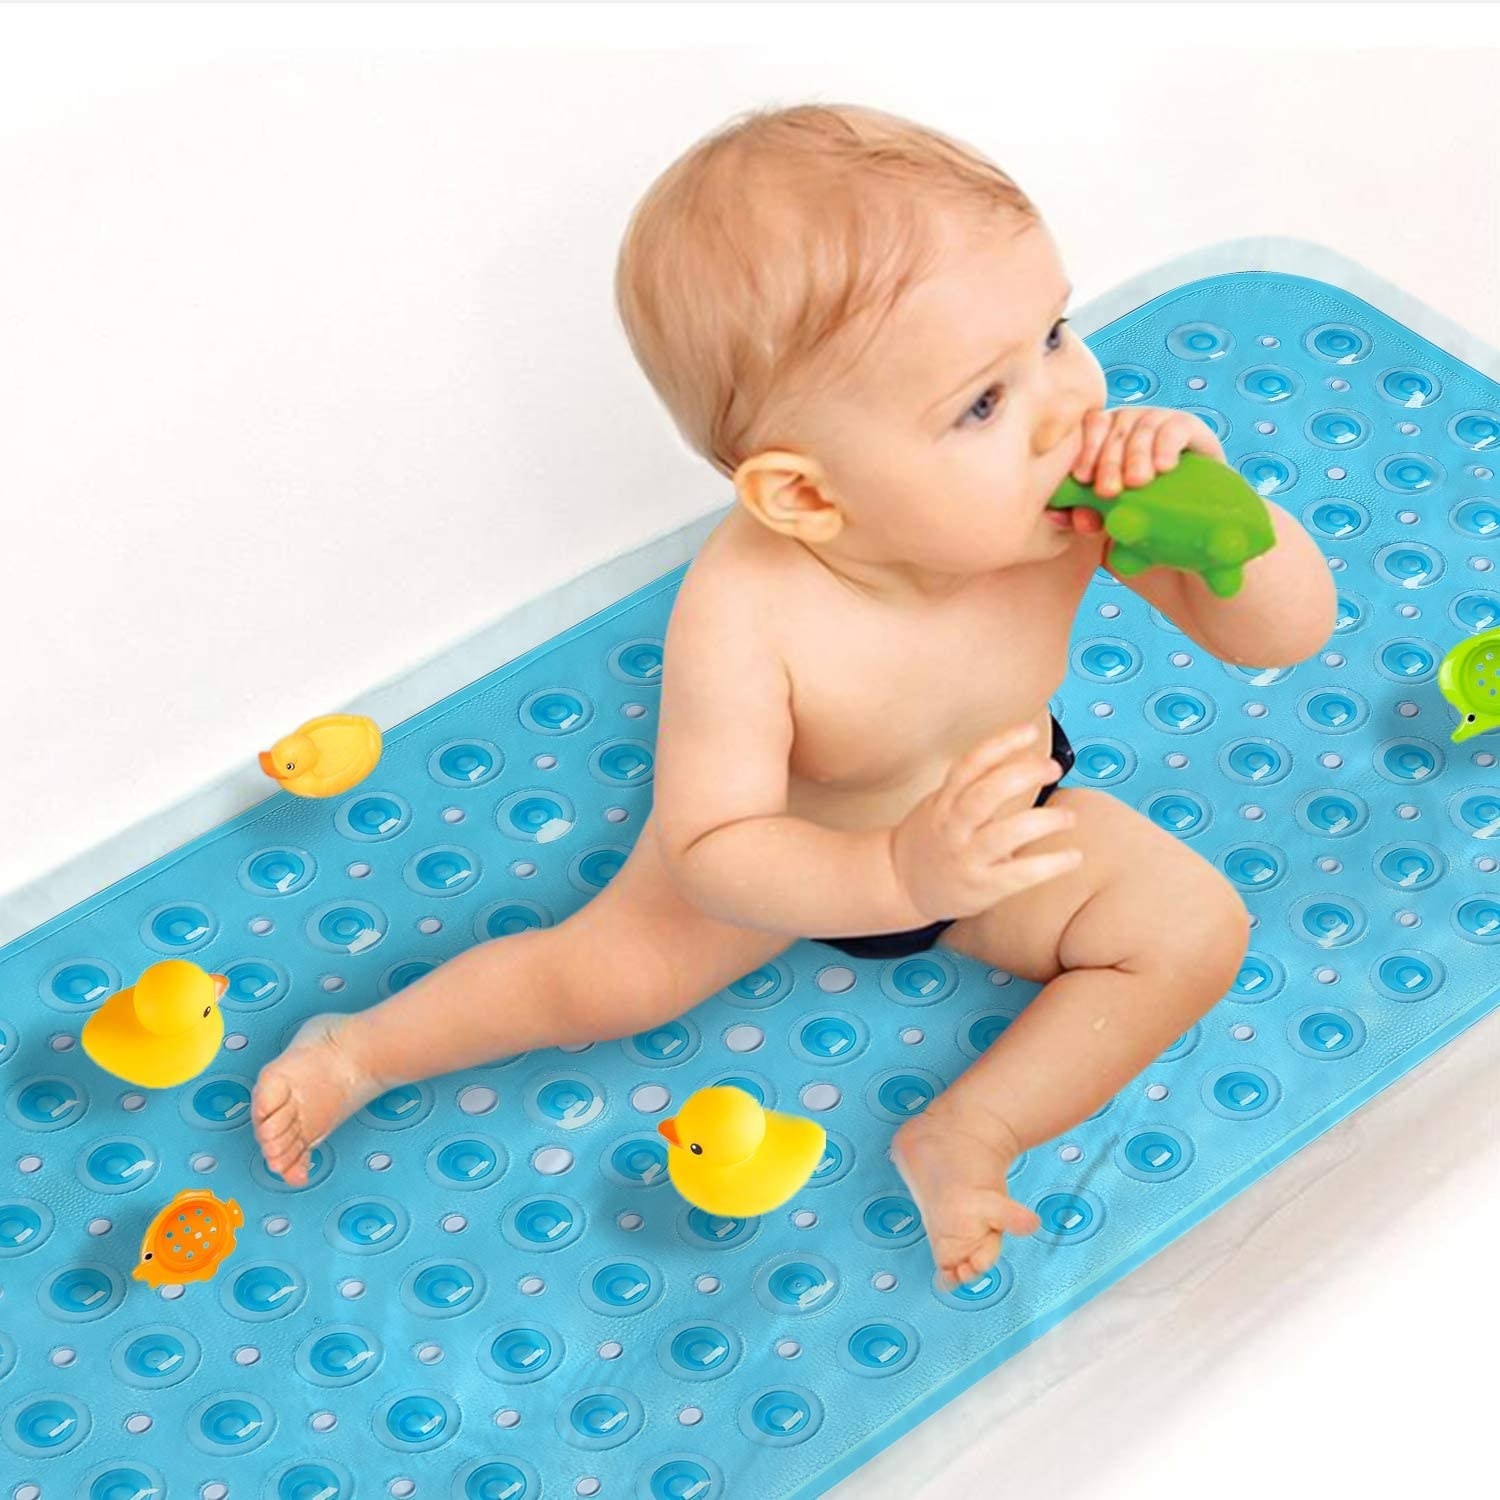 A child model sitting on the nonslip mat in the bathtub